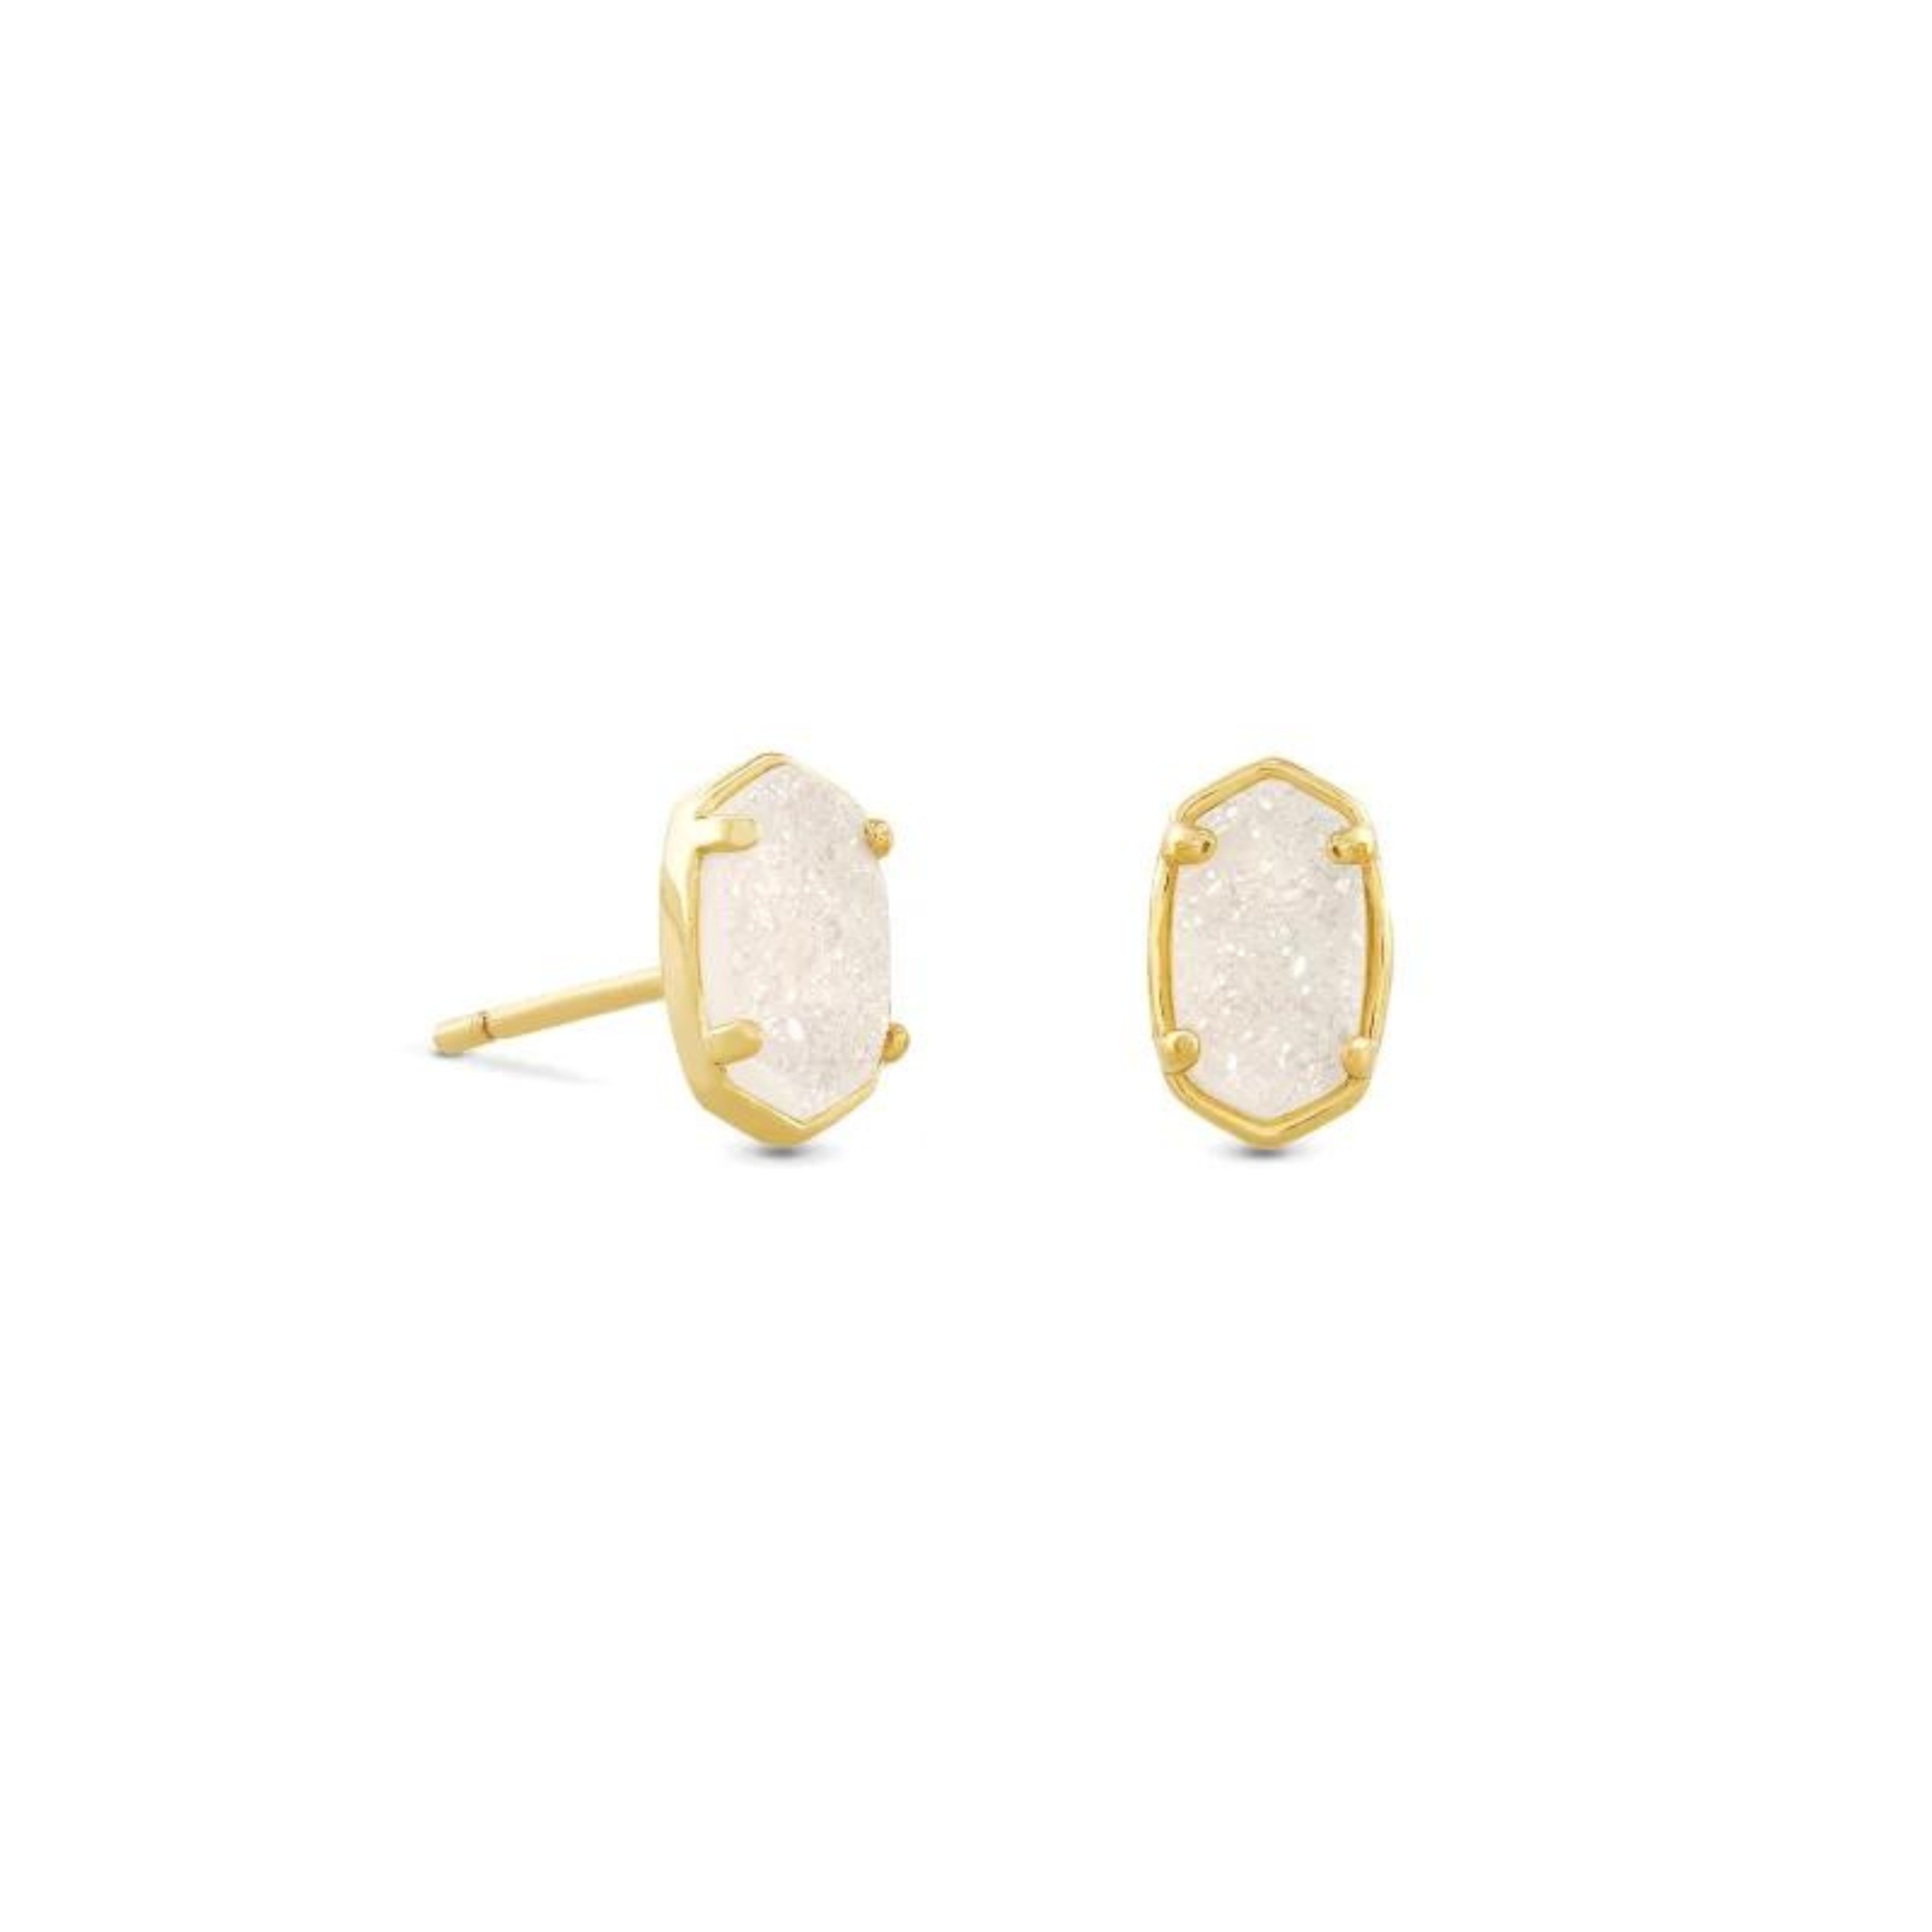 Kendra Scott | Emilie Gold Stud Earrings in Iridescent Drusy - Giddy Up Glamour Boutique